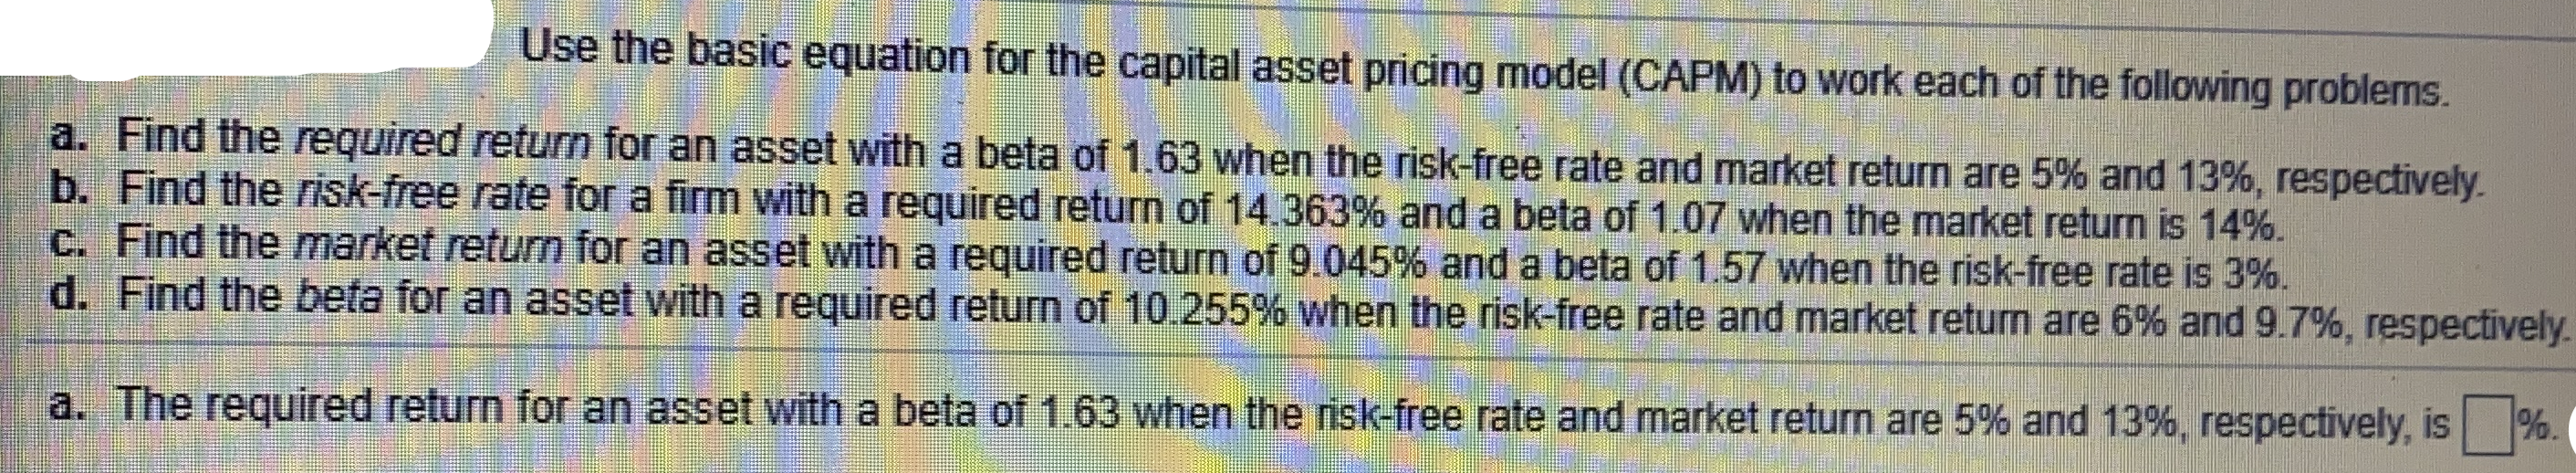 Use the basic equation for the capital asset pricing model (CAPM) to work each of the following problems.
a. Find the required return for an asset with a beta of 1.63 when the risk-free rate and market return are 5% and 13%, respectively.
b. Find the risk-free rate for a firm witha required return of 14.363% and a beta of 1.07 when the market return is 14%.
C. Find the market return for an asset with a required return of 9.045% and a beta of 1.57 when the risk-free rate is 3%.
d. Find the beta for an asset with a required return of 10.255% when the risk-free rate and market return are 6% and 9.7%, respectively.
a. The required return for an asset with a beta of 1.63 when the risk-free rate and market return are 5% and 13%, respectively, is %.
